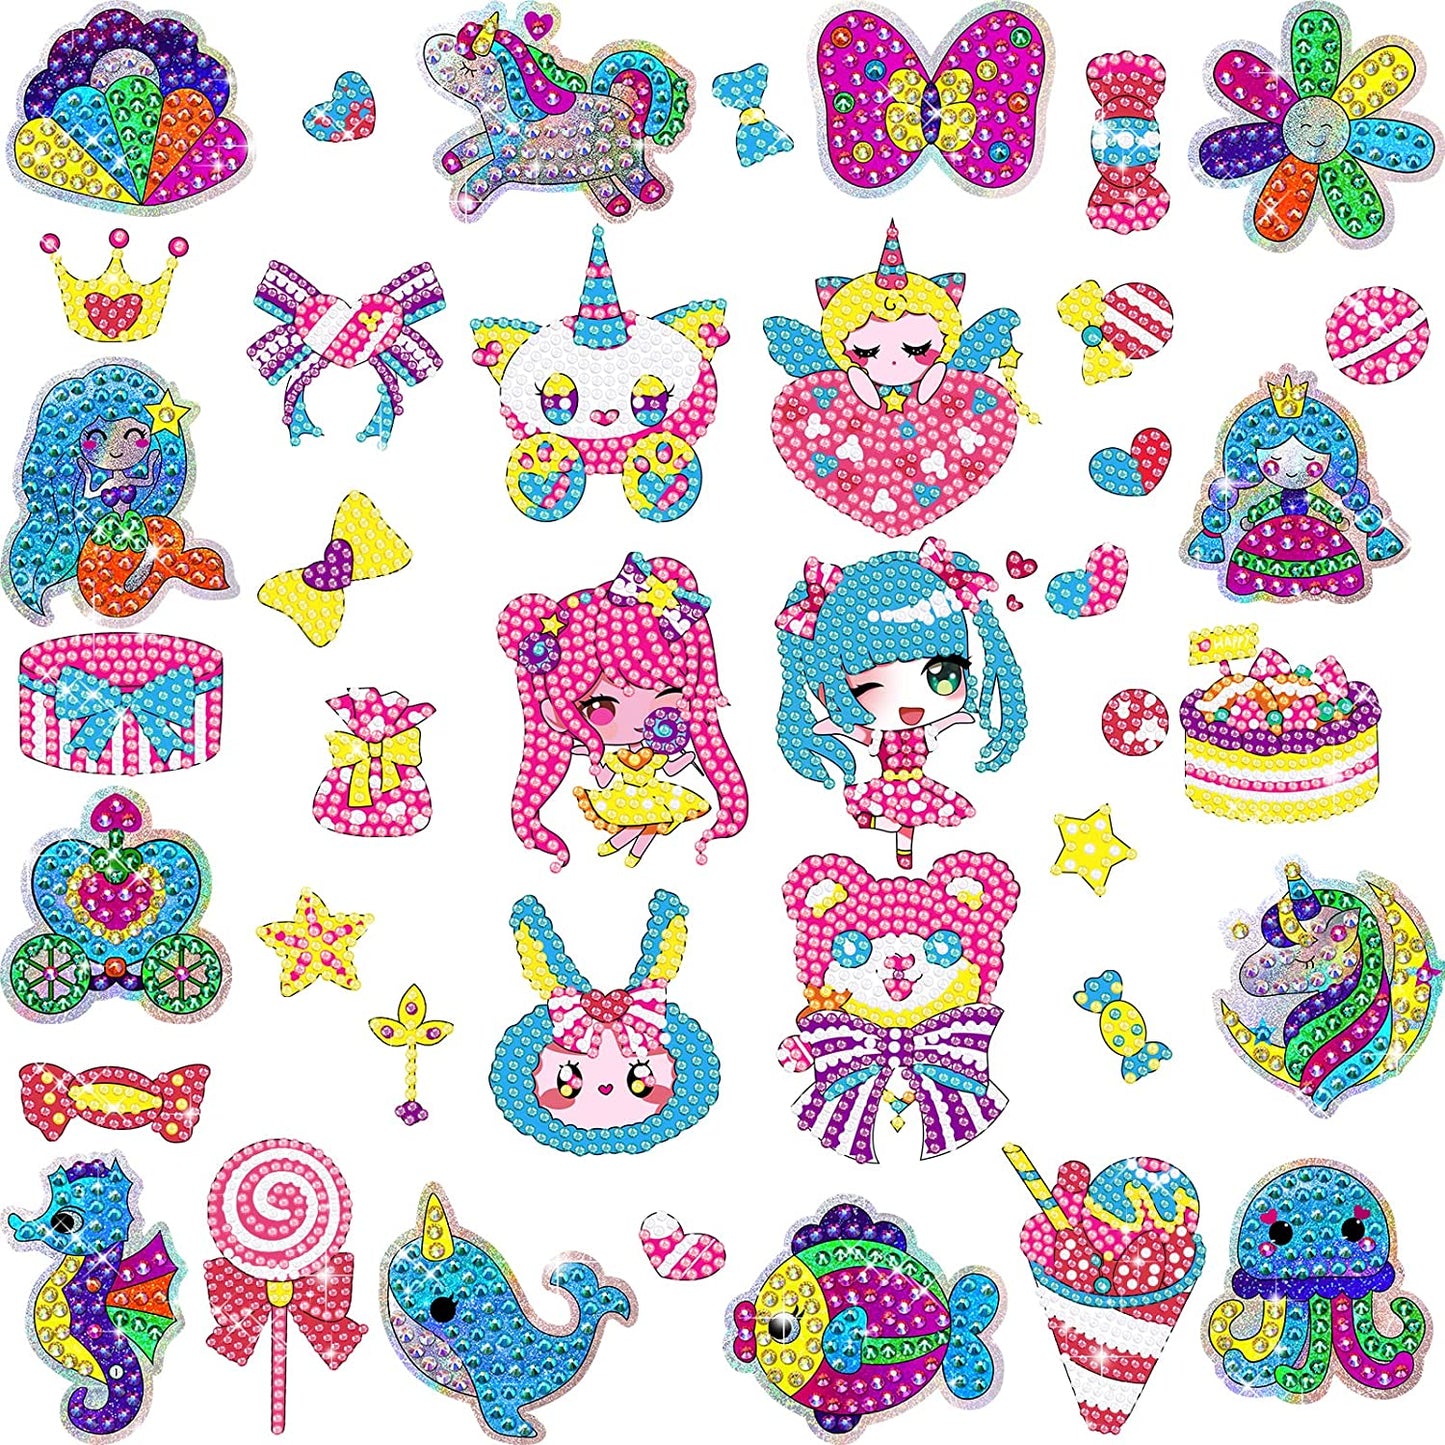 Arts Craft for Kids,Diamond Stickers Painting Kits Toys for Girls 8-11 Years